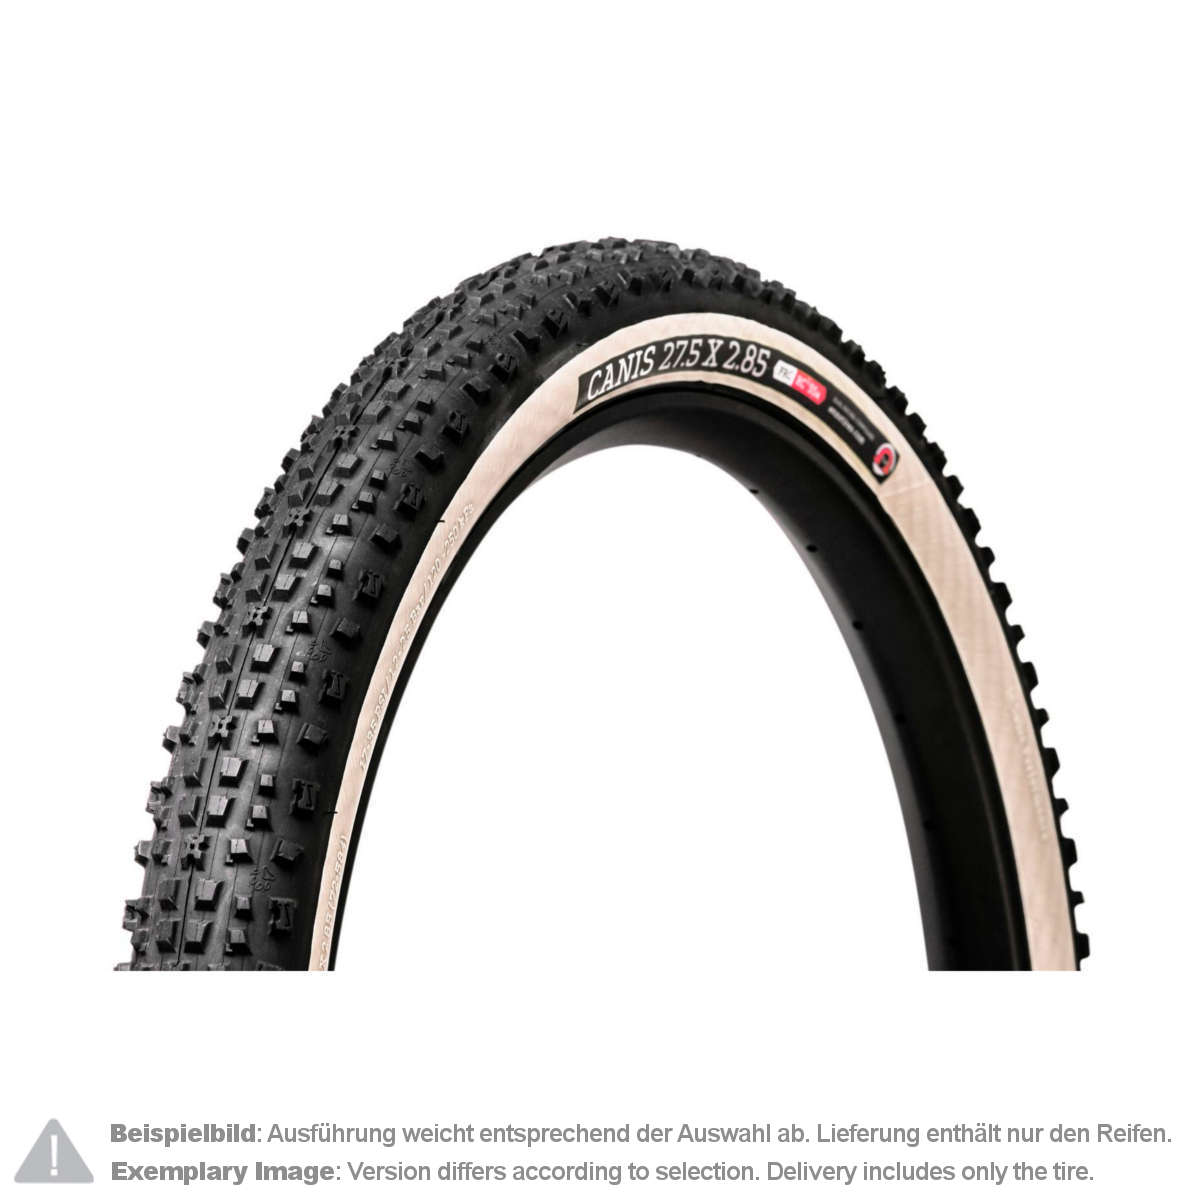 Onza MTB Tire Canis Skinwall, 27.5 x 2.25 Inch, Tubeless Ready, 60 TPI, C3, 65a/55a, Foldable